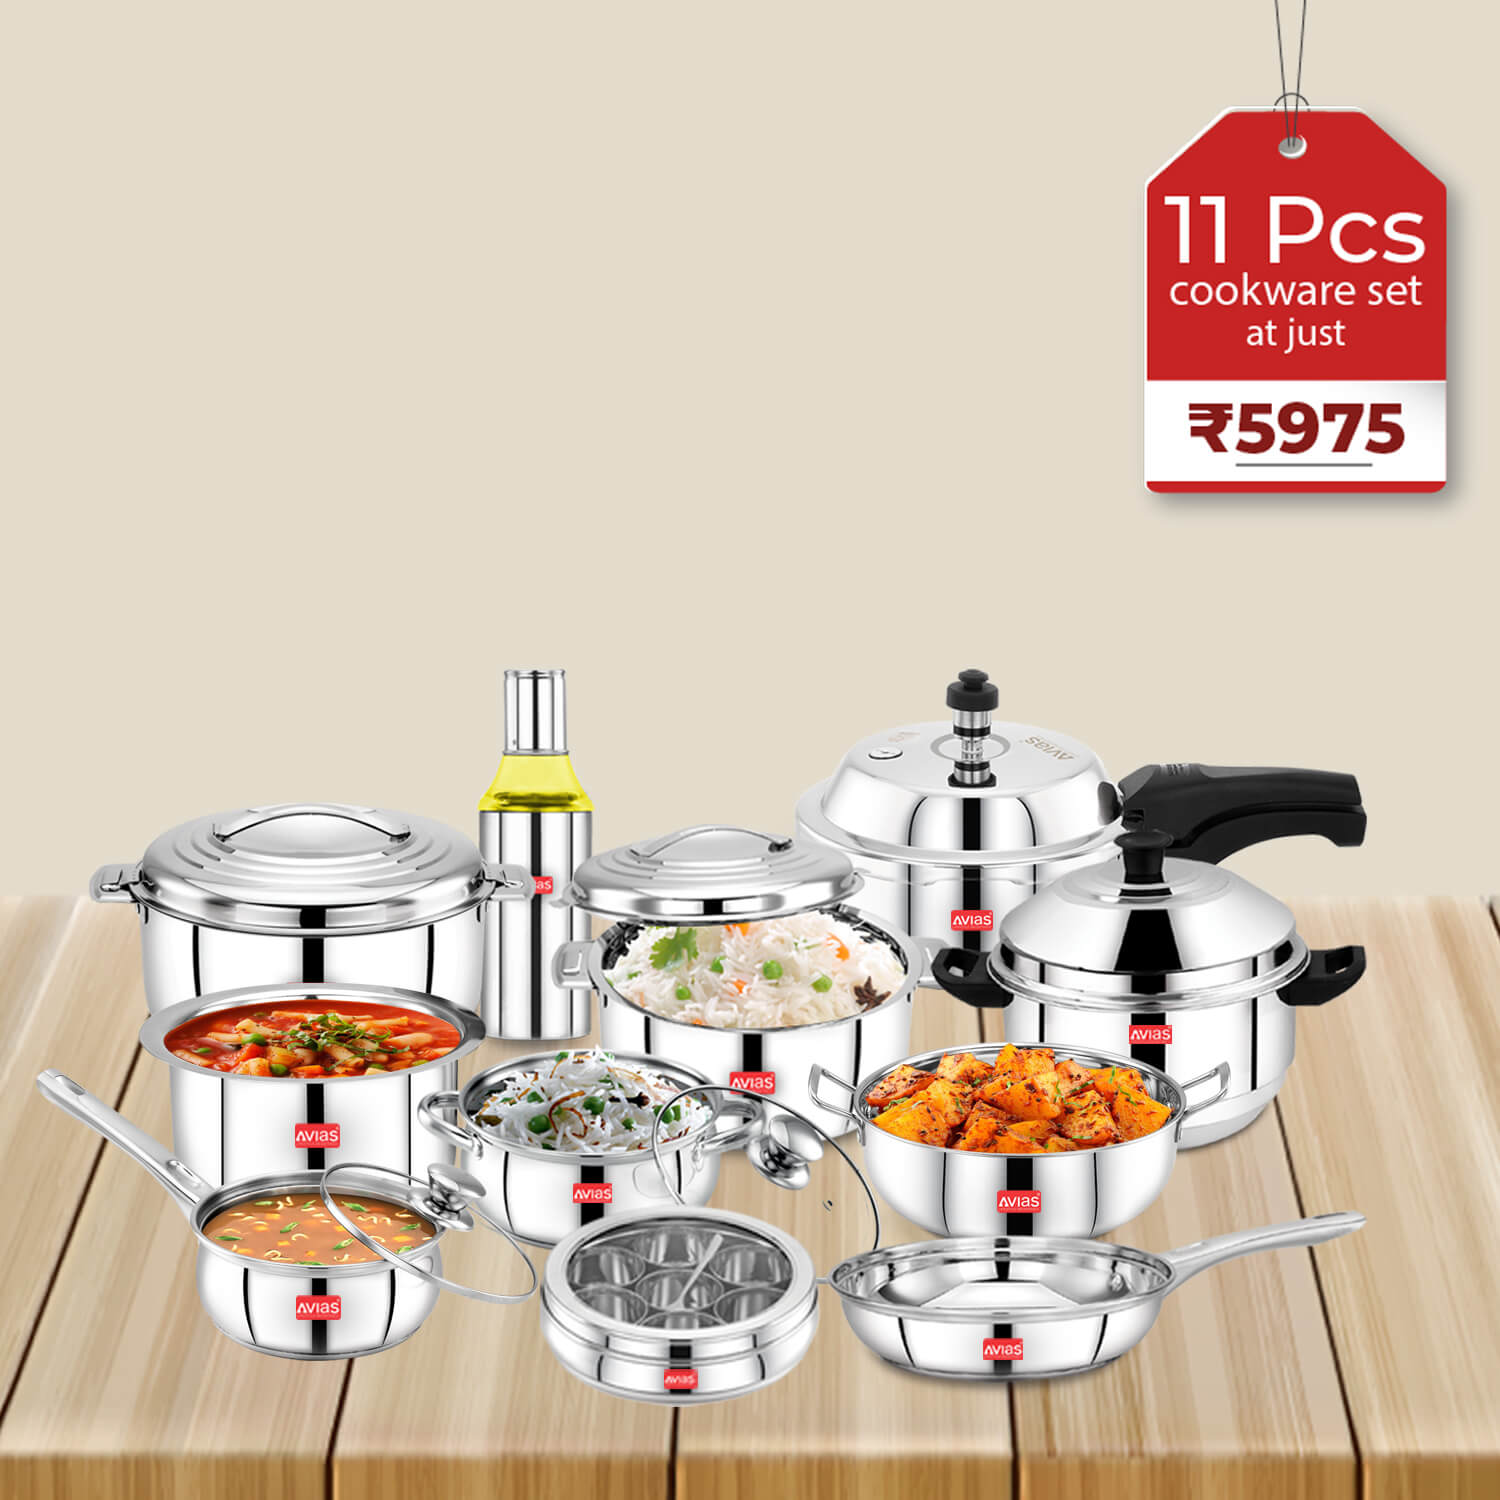 Avias Stainless Steel 11 PCS Kitchen set | Standard | High grade and Premium quality